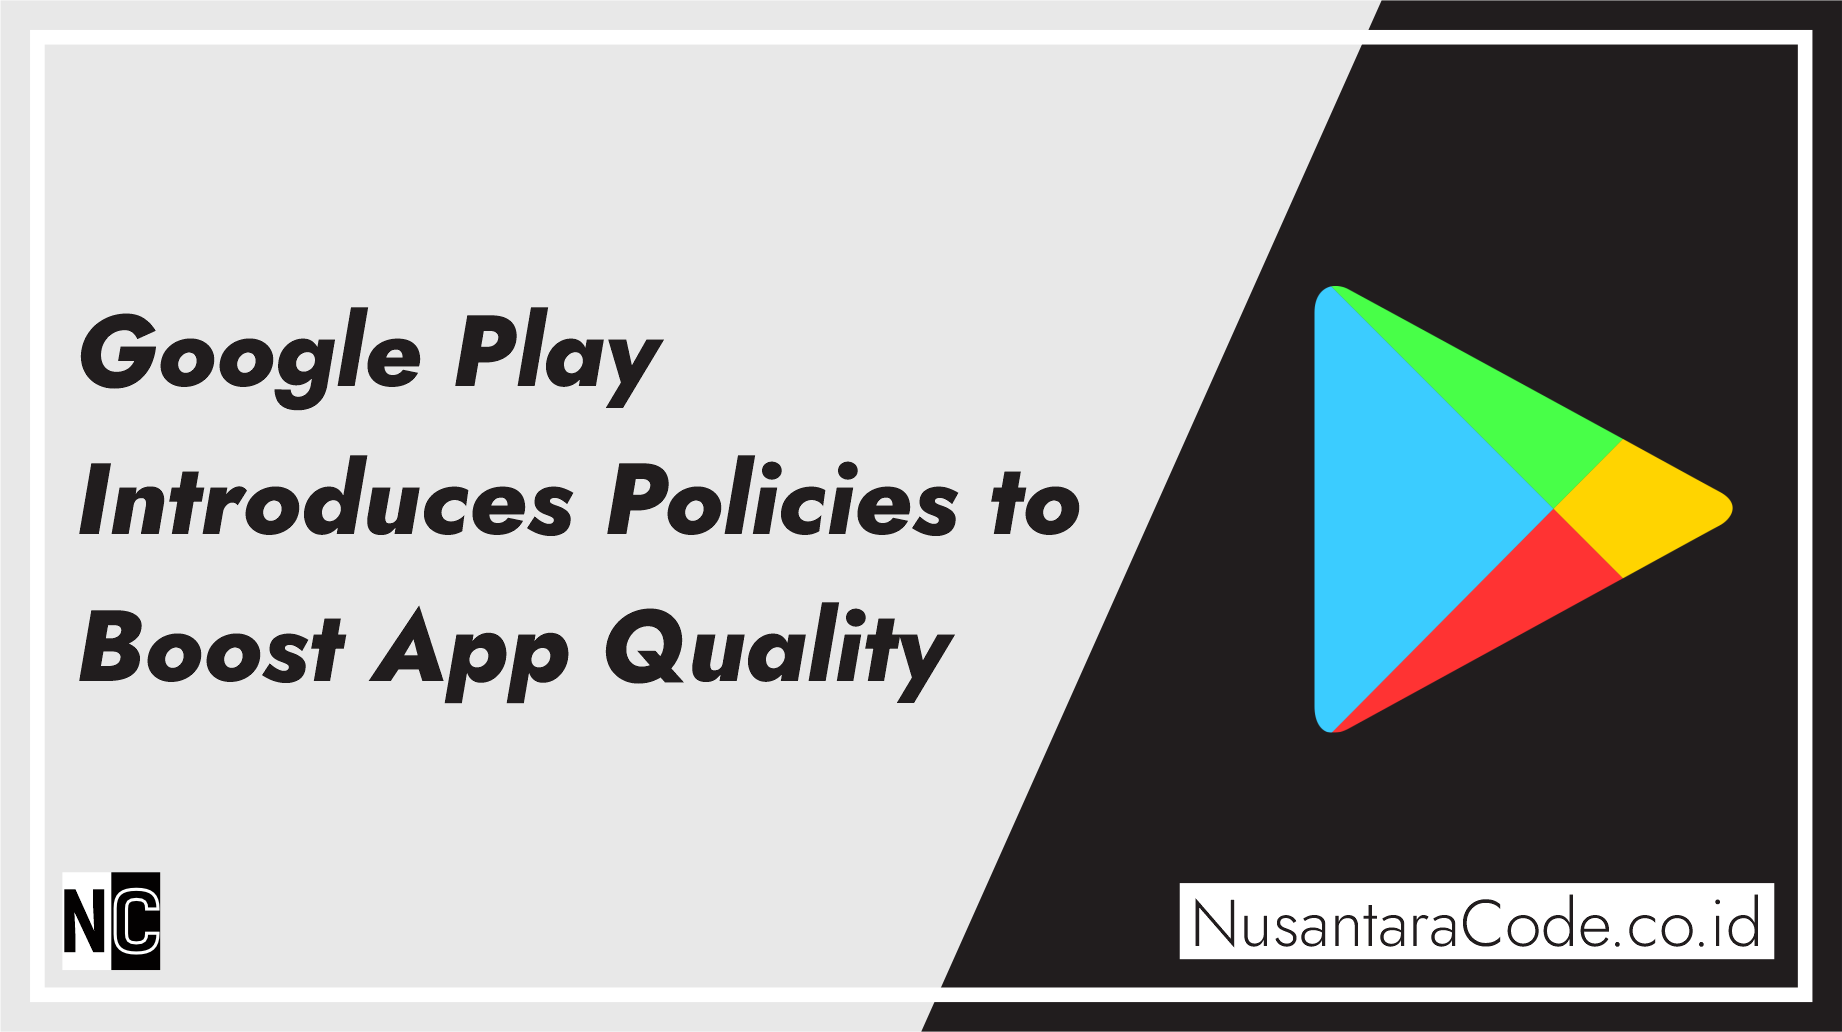 Google Play Introduces Policies to Boost App Quality